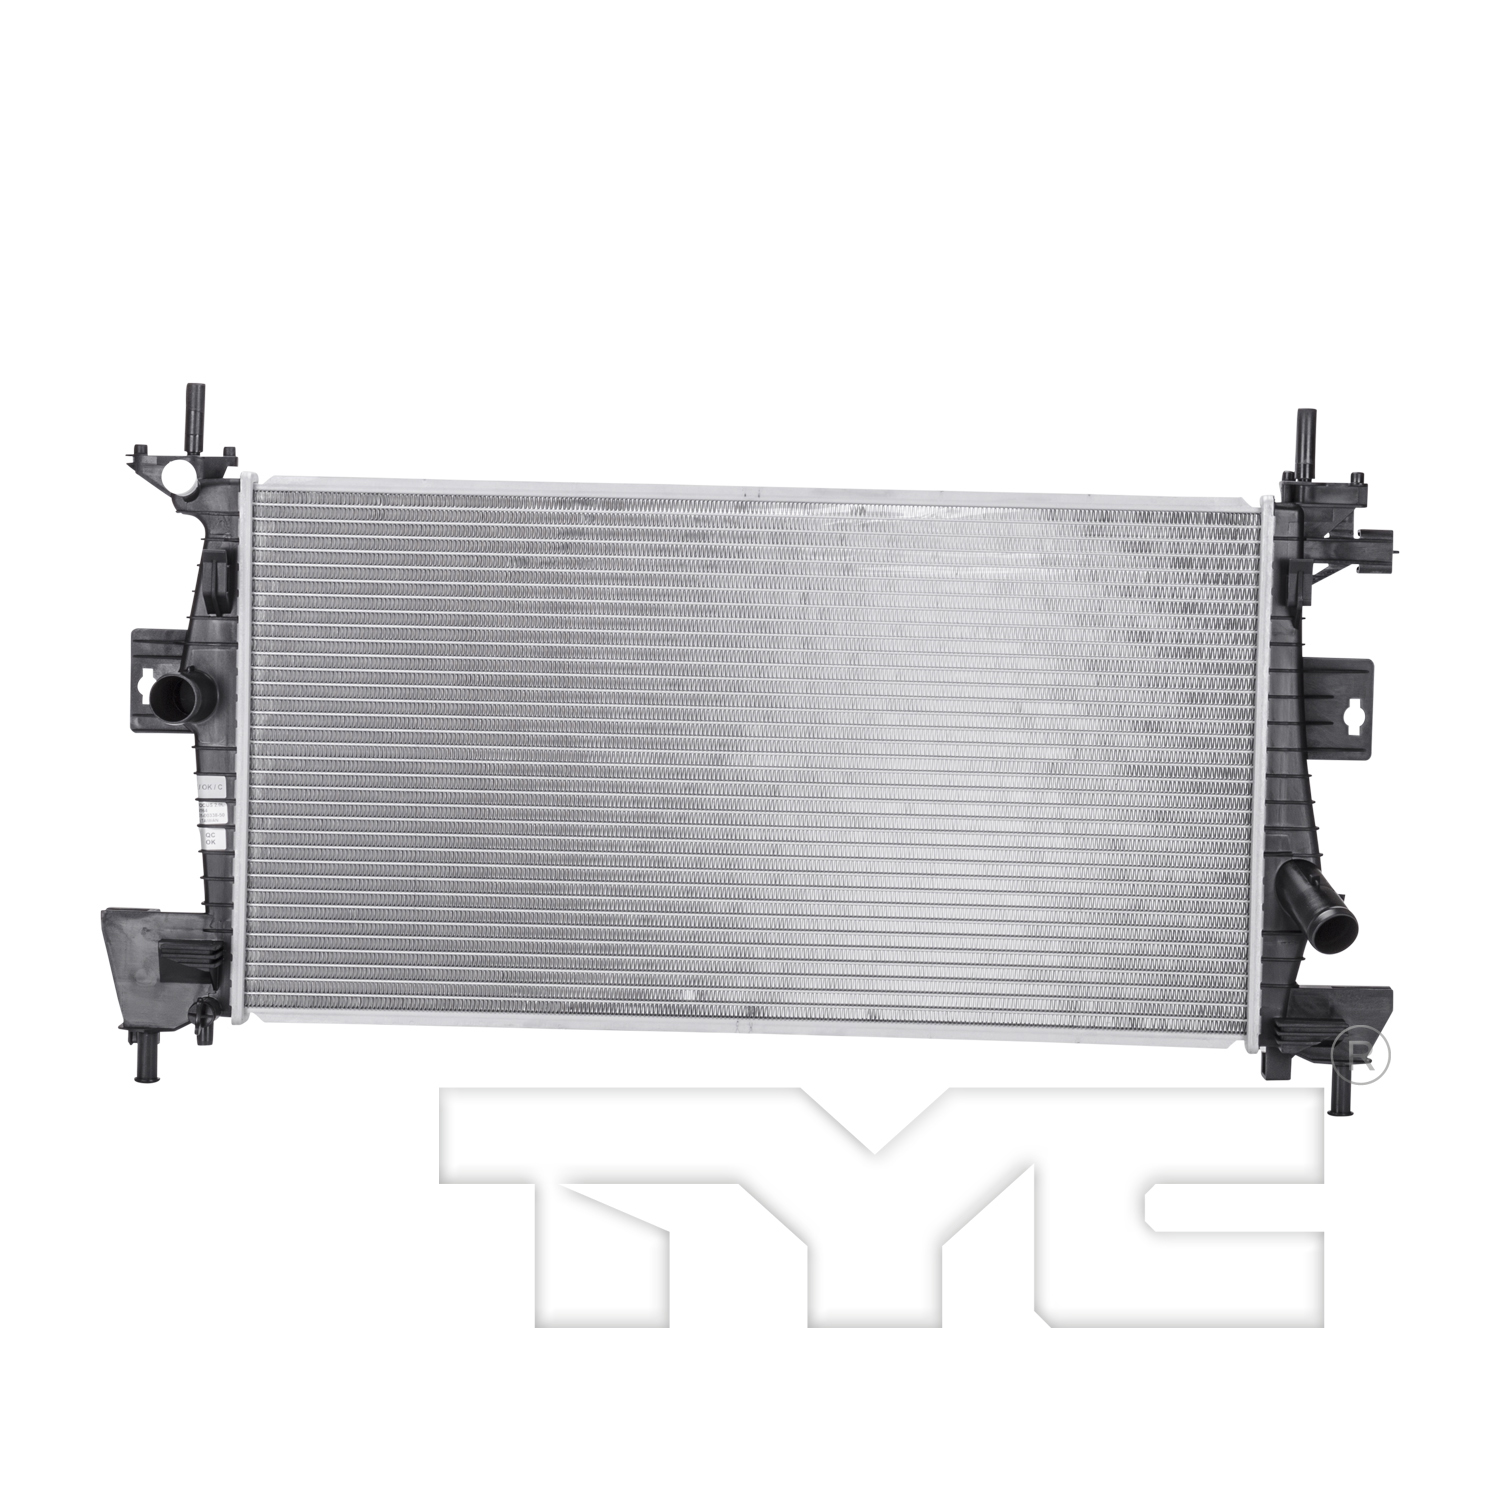 Aftermarket RADIATORS for FORD - FOCUS, FOCUS,12-18,Radiator assembly